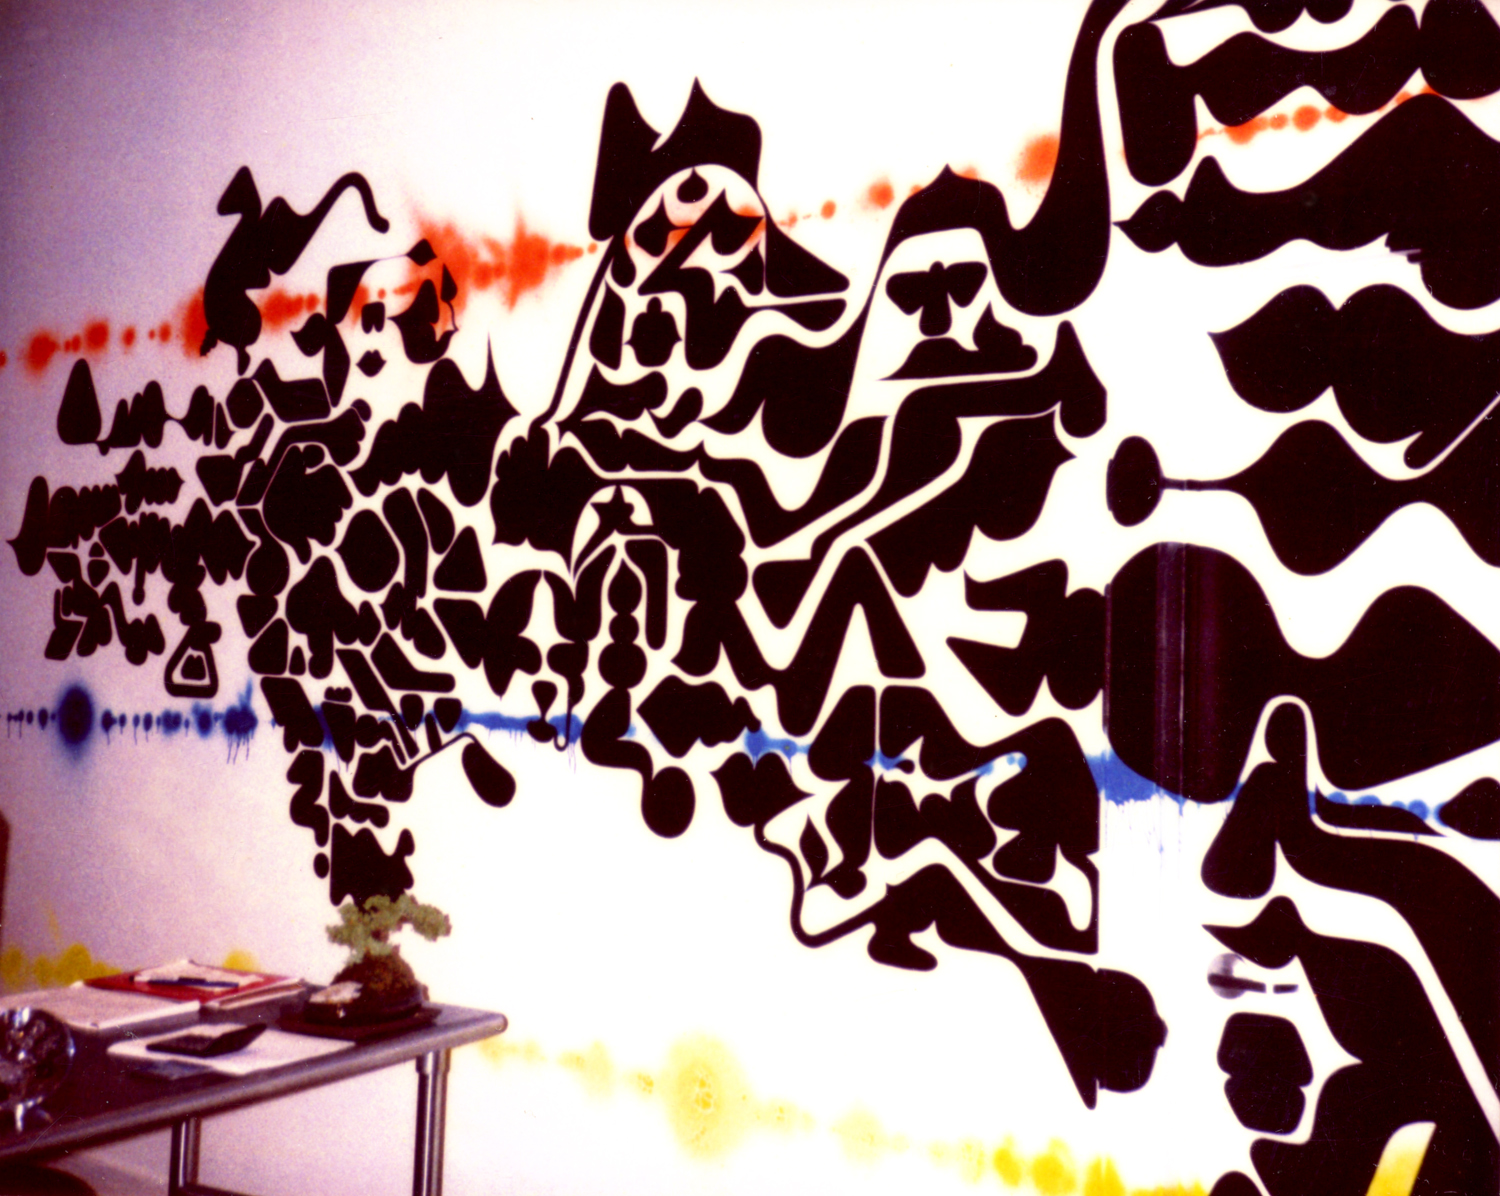  installation view,&nbsp; mural commission for  PMI offices  Soho, NY, 1999 